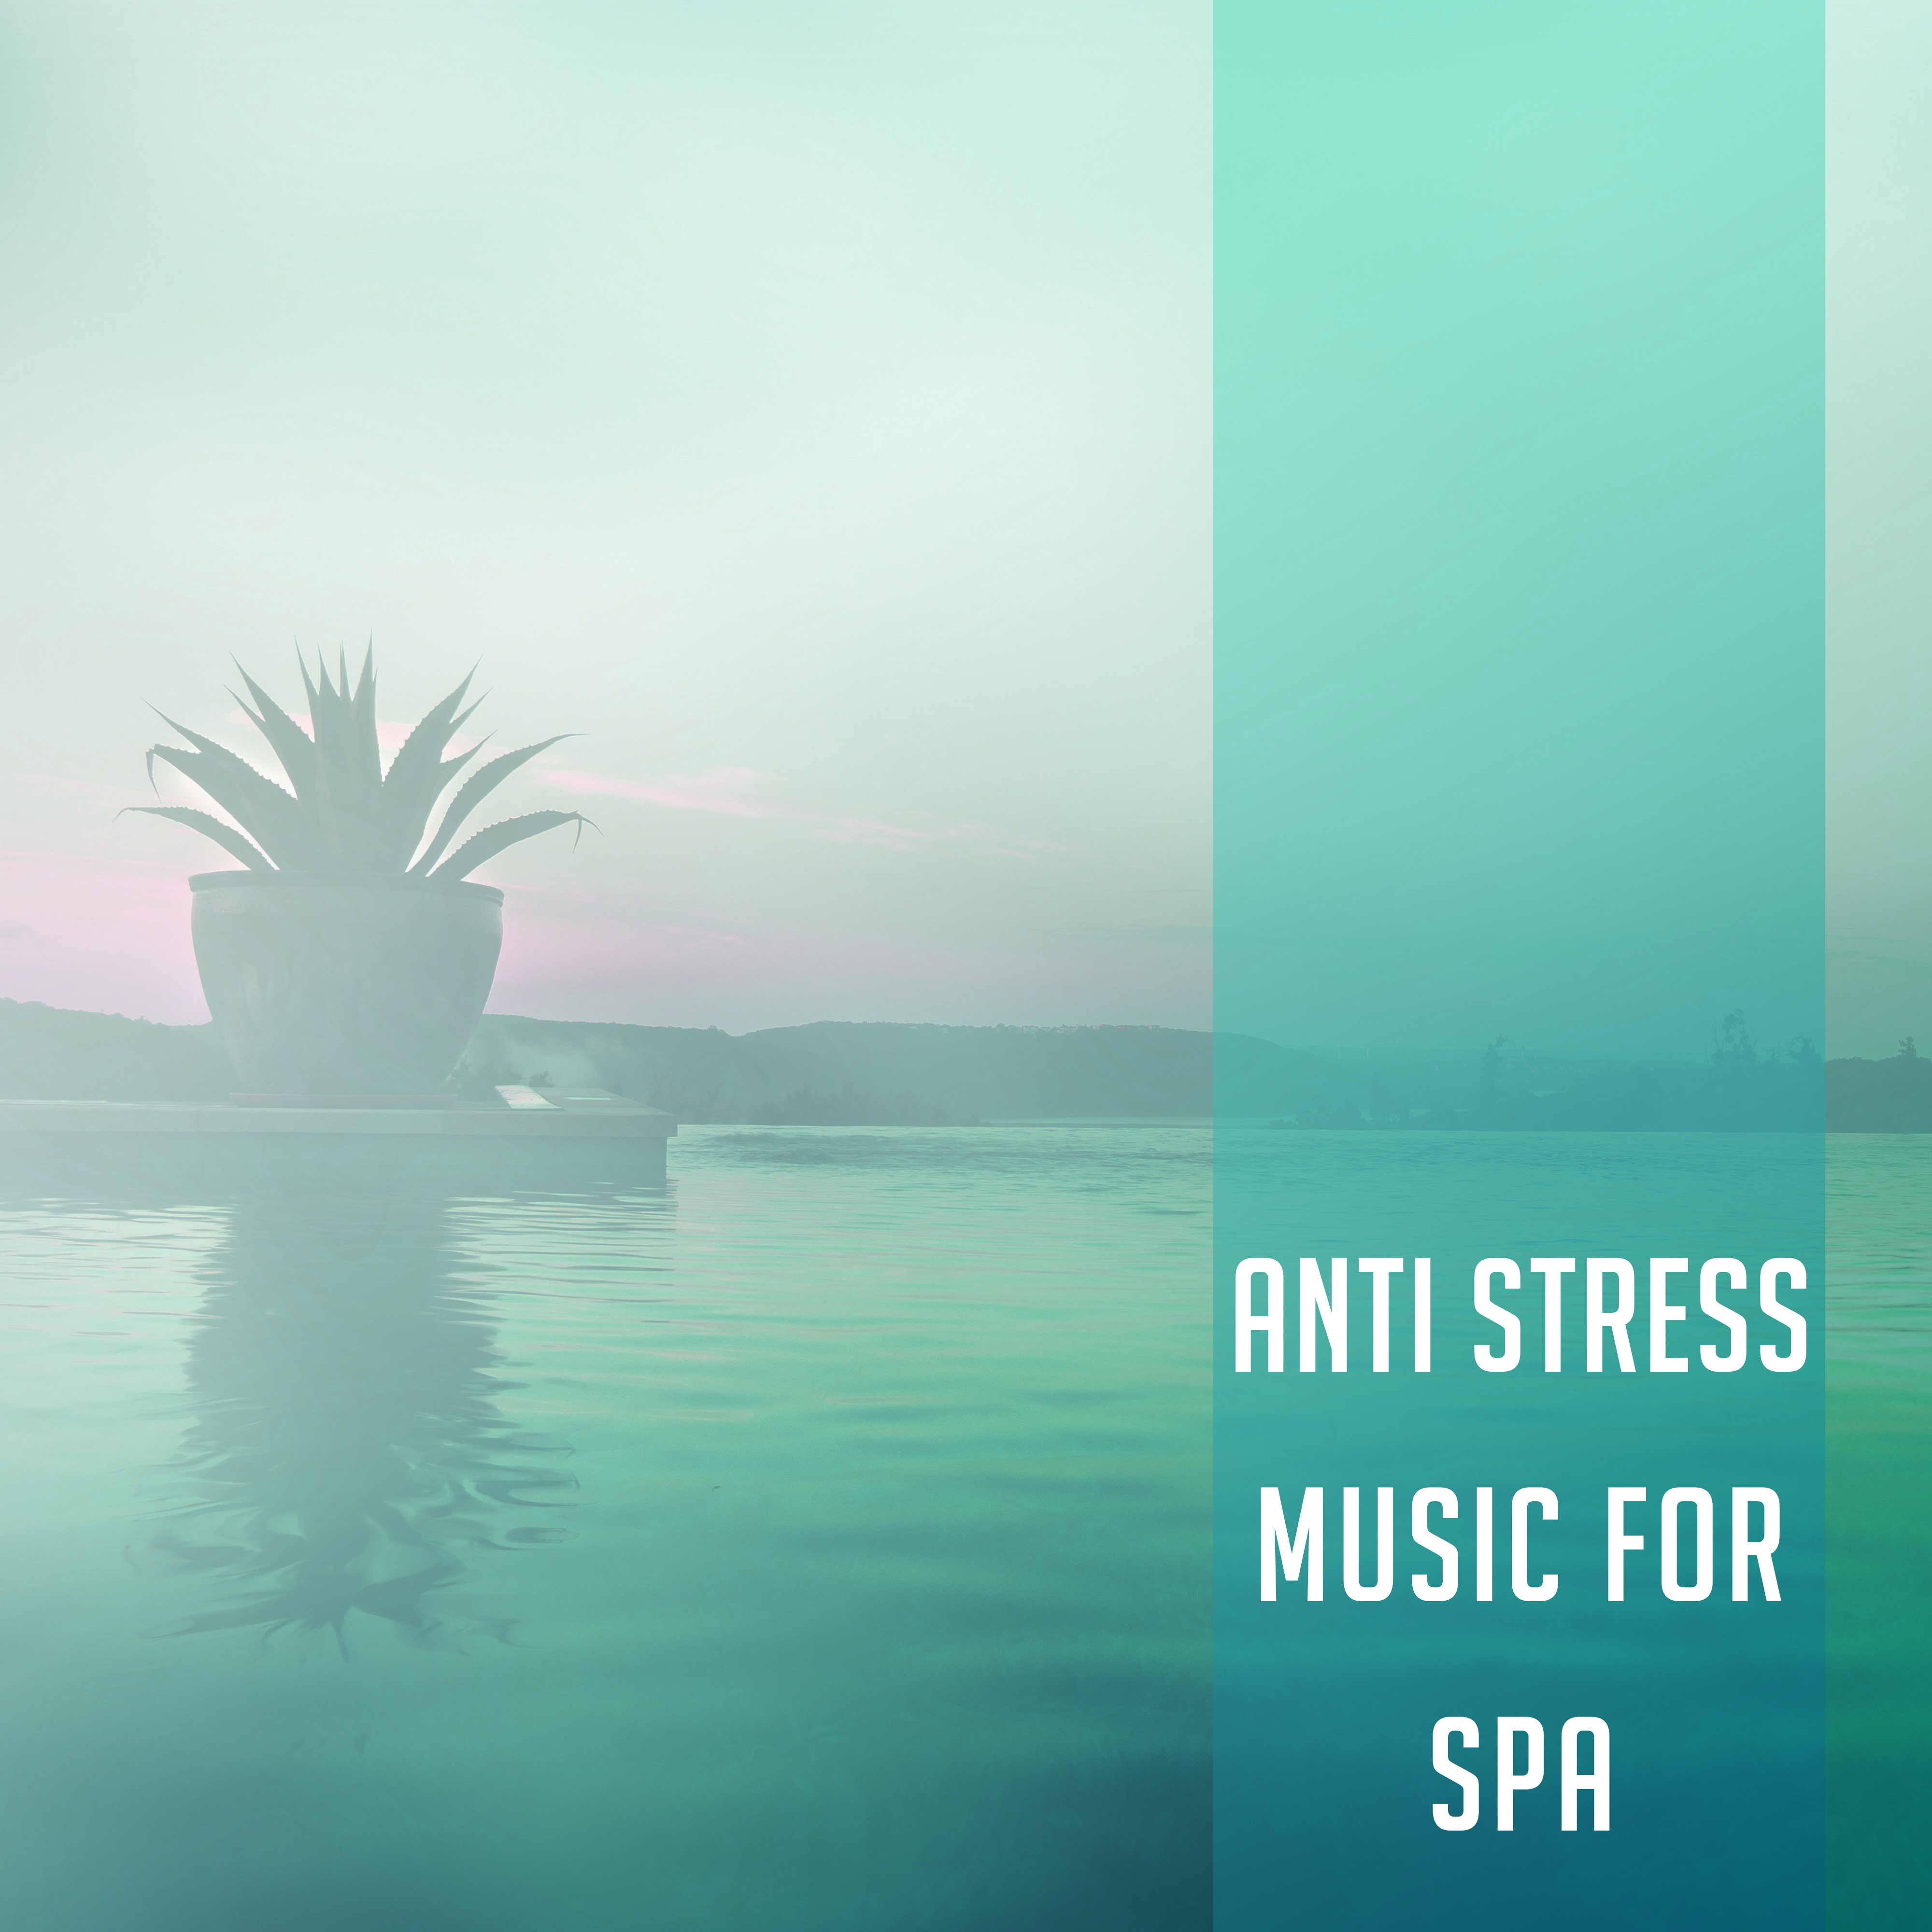 Anti Stress Music for Spa  Peaceful Nature Sounds for Relaxation, Beauty, Pure Massage, Calm Down, Therapy Music